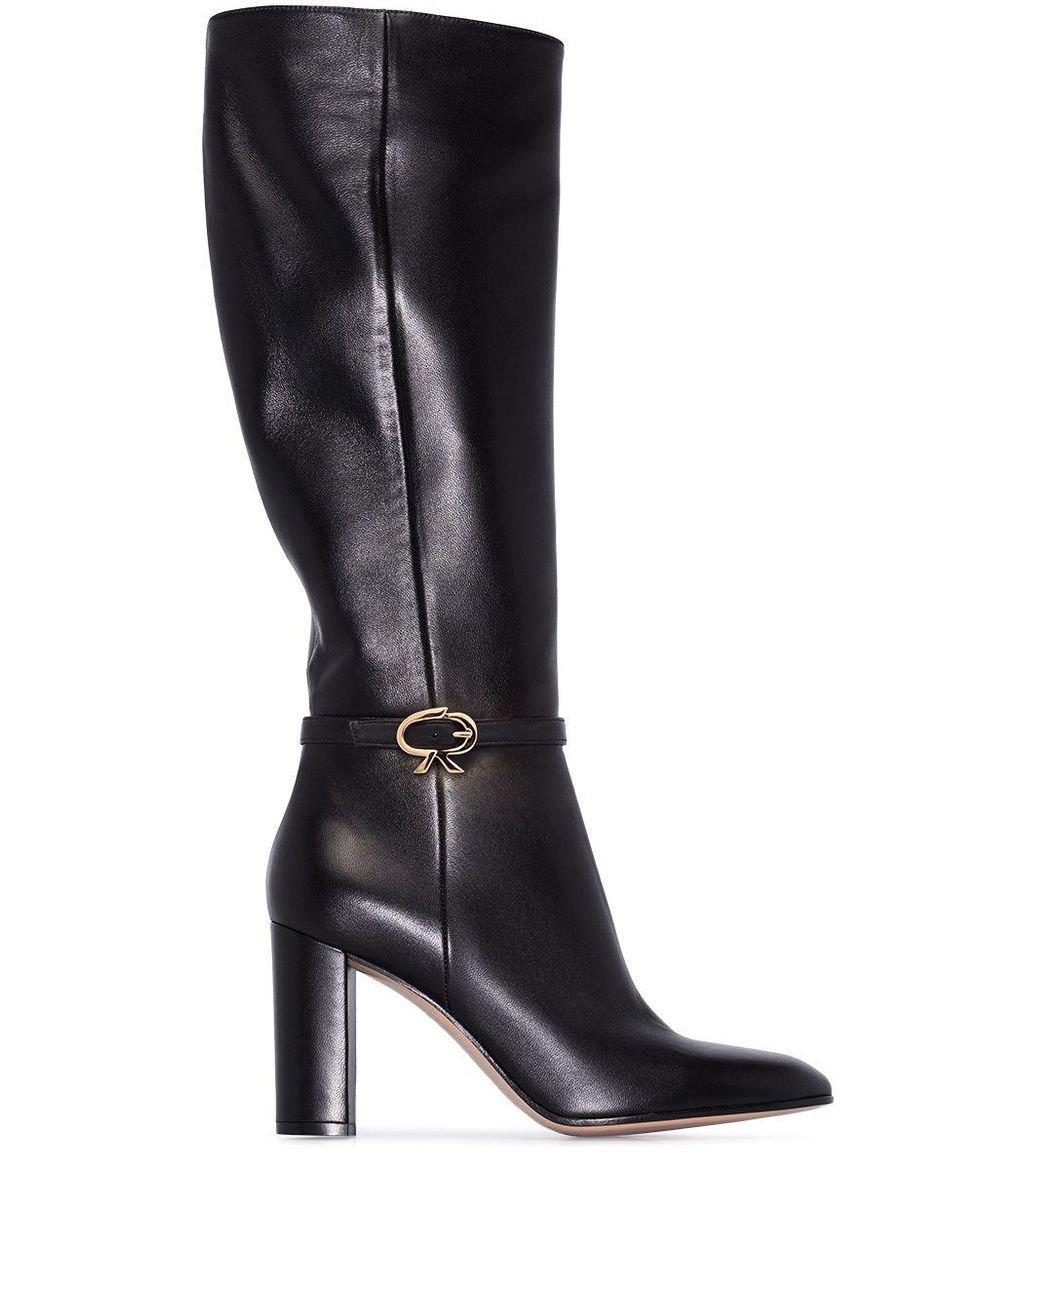 Gianvito Rossi Leather Ribbon 85mm Knee-high Boots in Black - Lyst